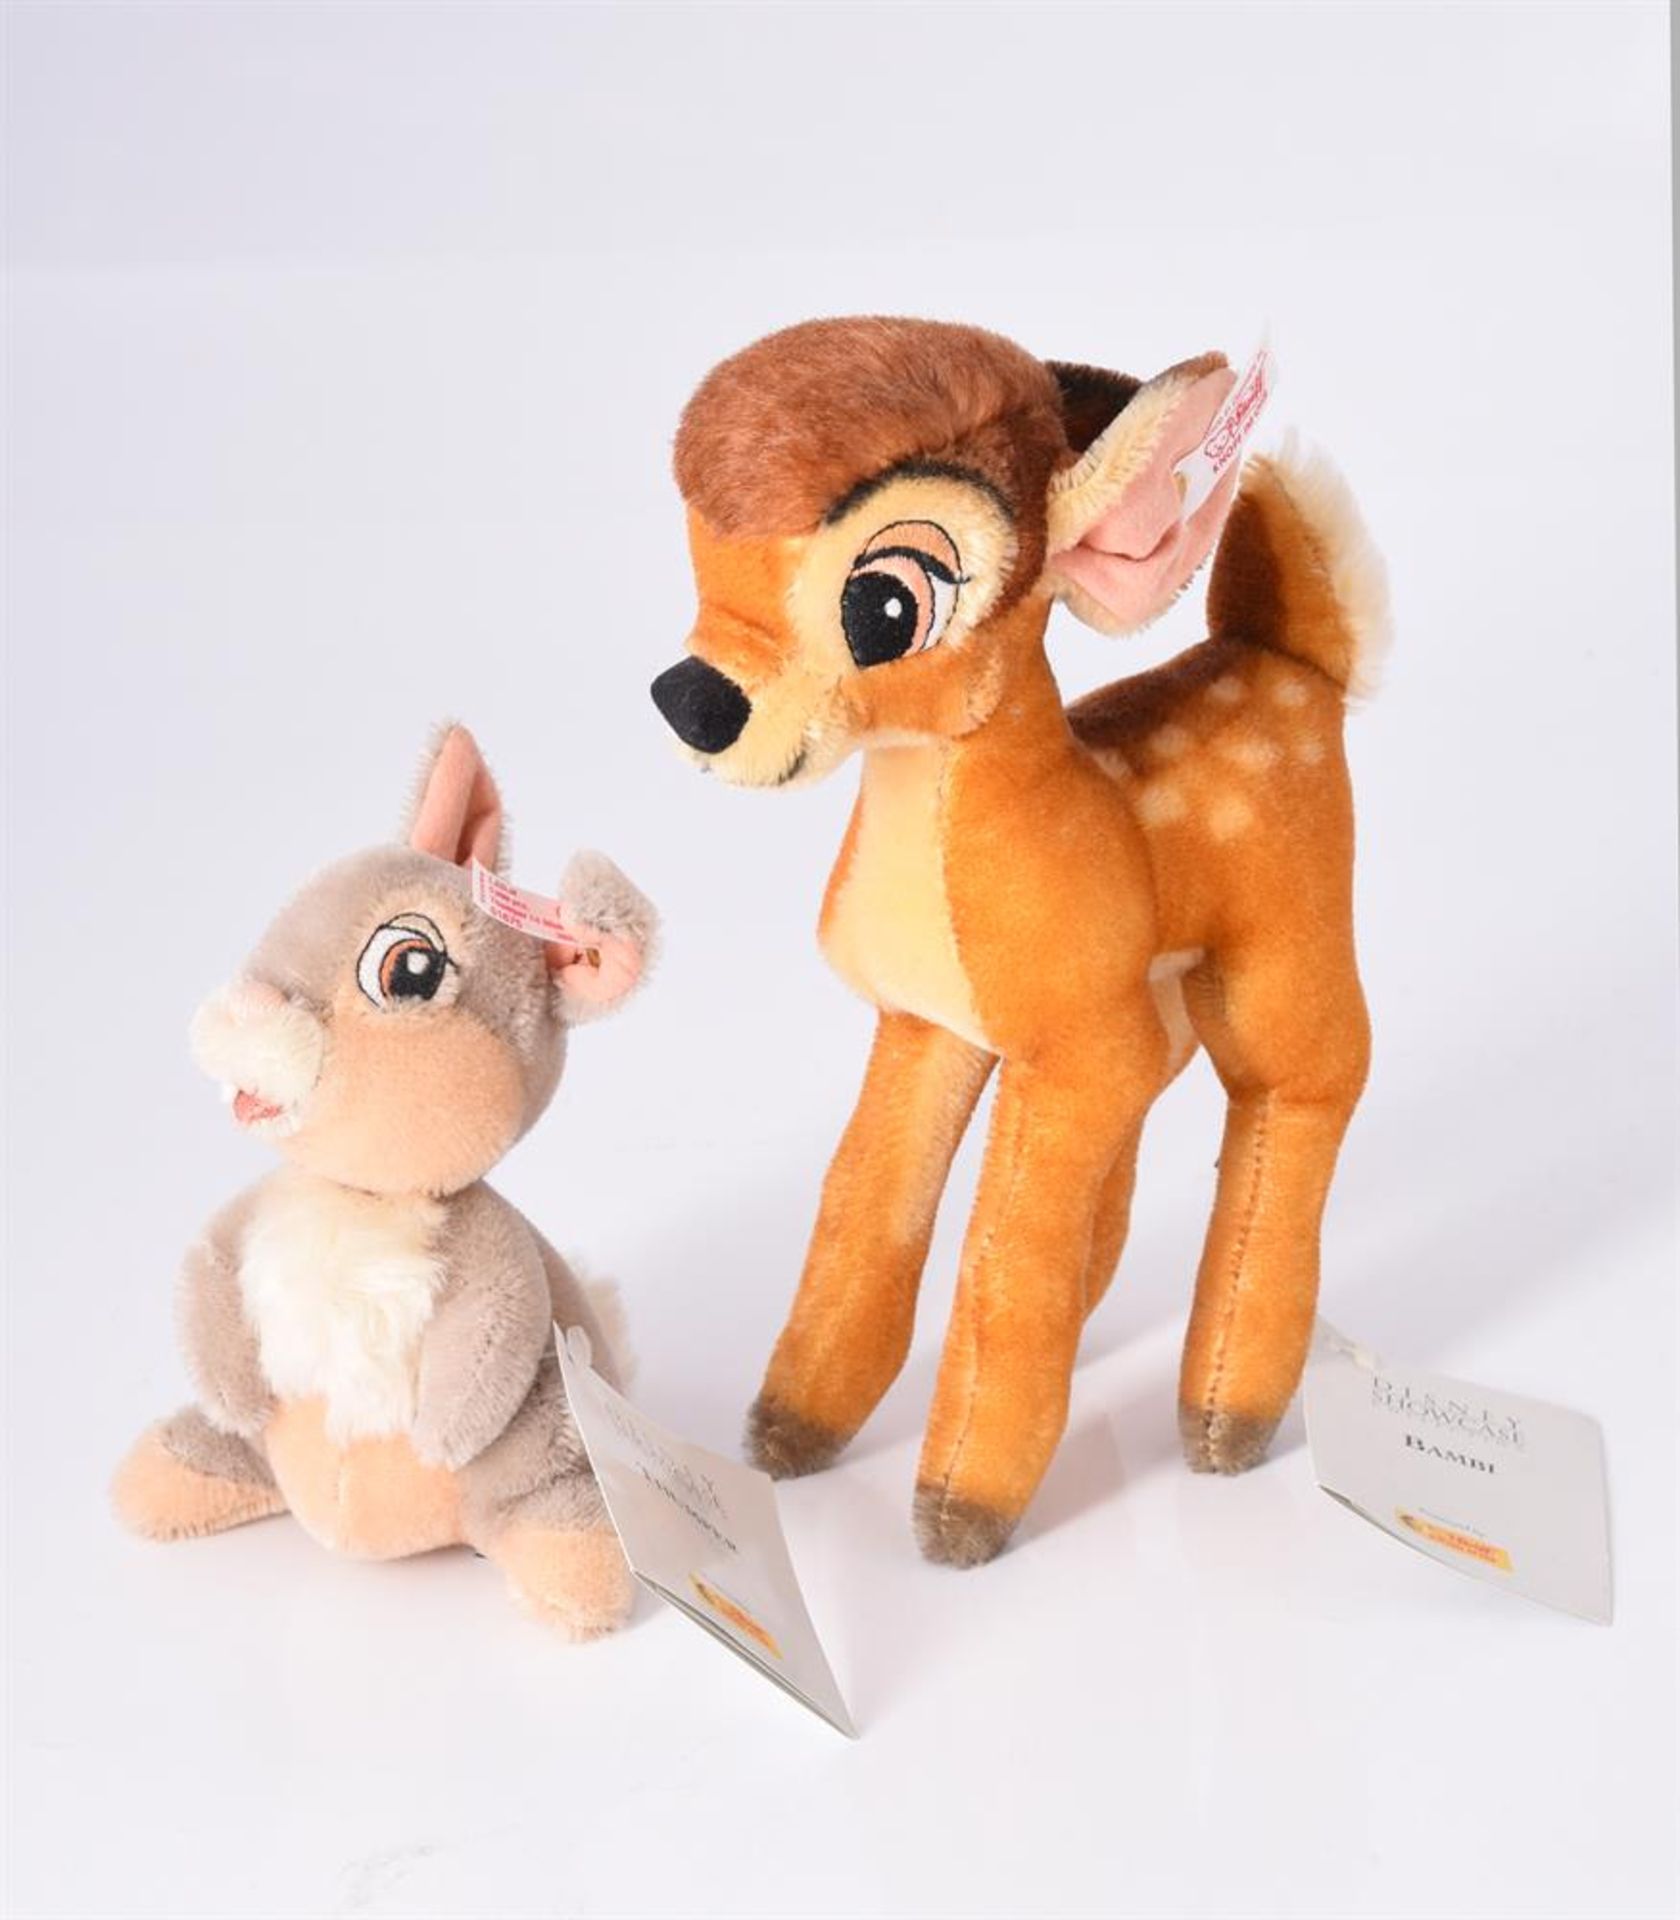 STEIFF, BAMBI AND THUMPER, 01946 and 01675, DISNEY SHOWCASE COLLECTION, CIRCA 2002 - Image 2 of 3